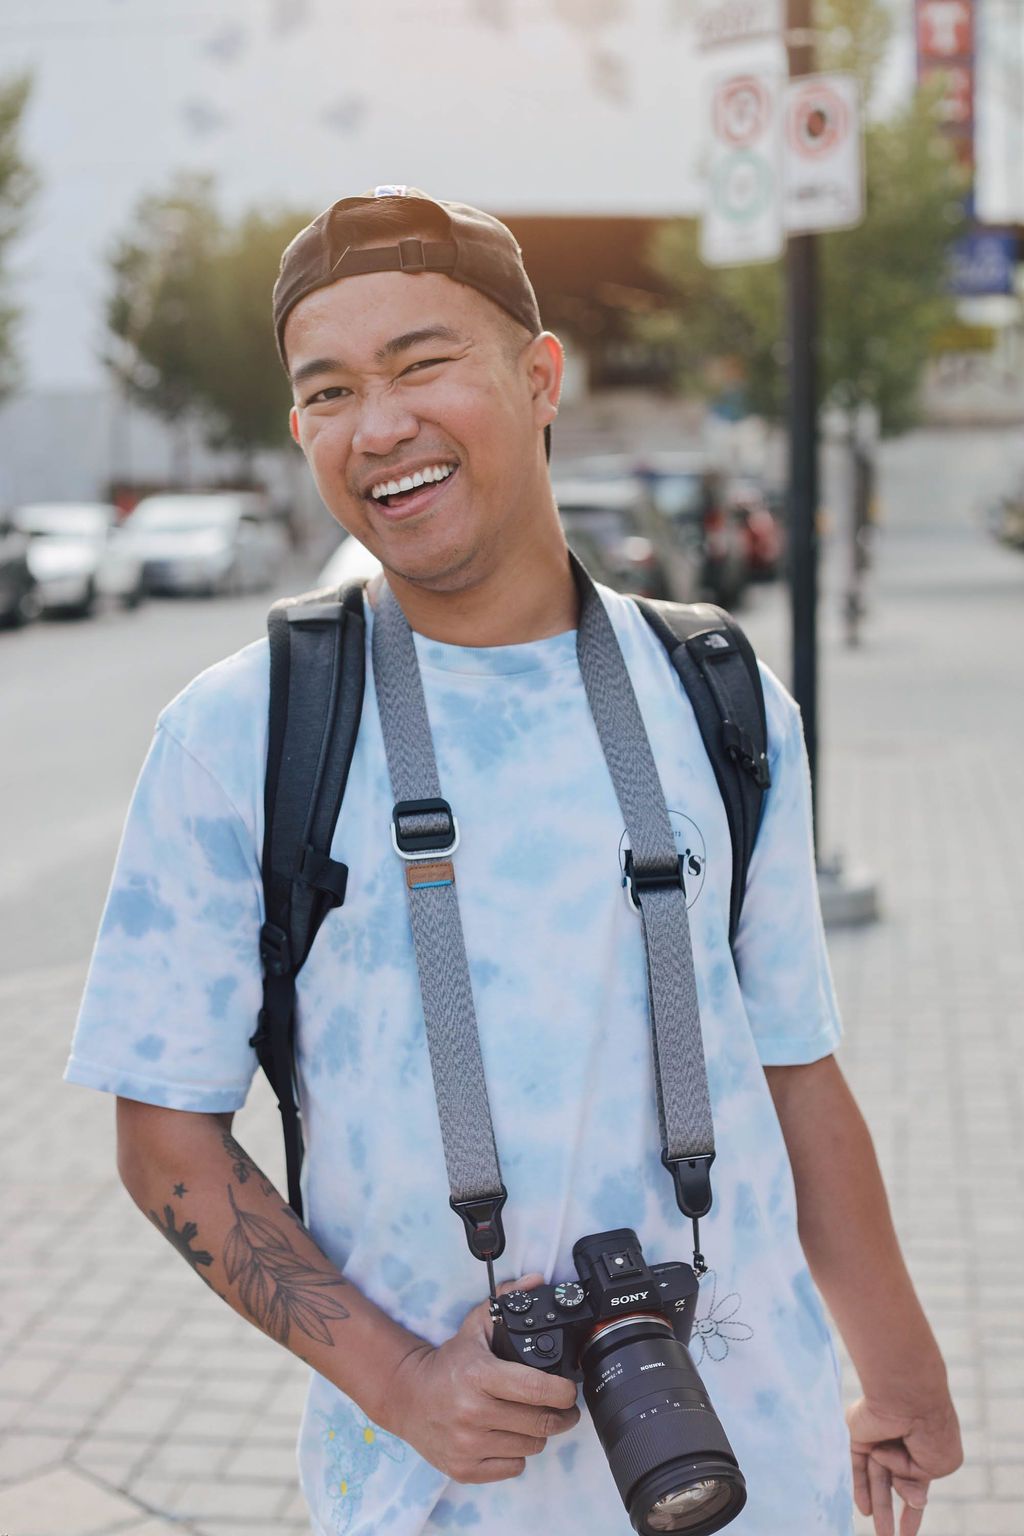 Man in downtown streets with a camera in hand and smiling 